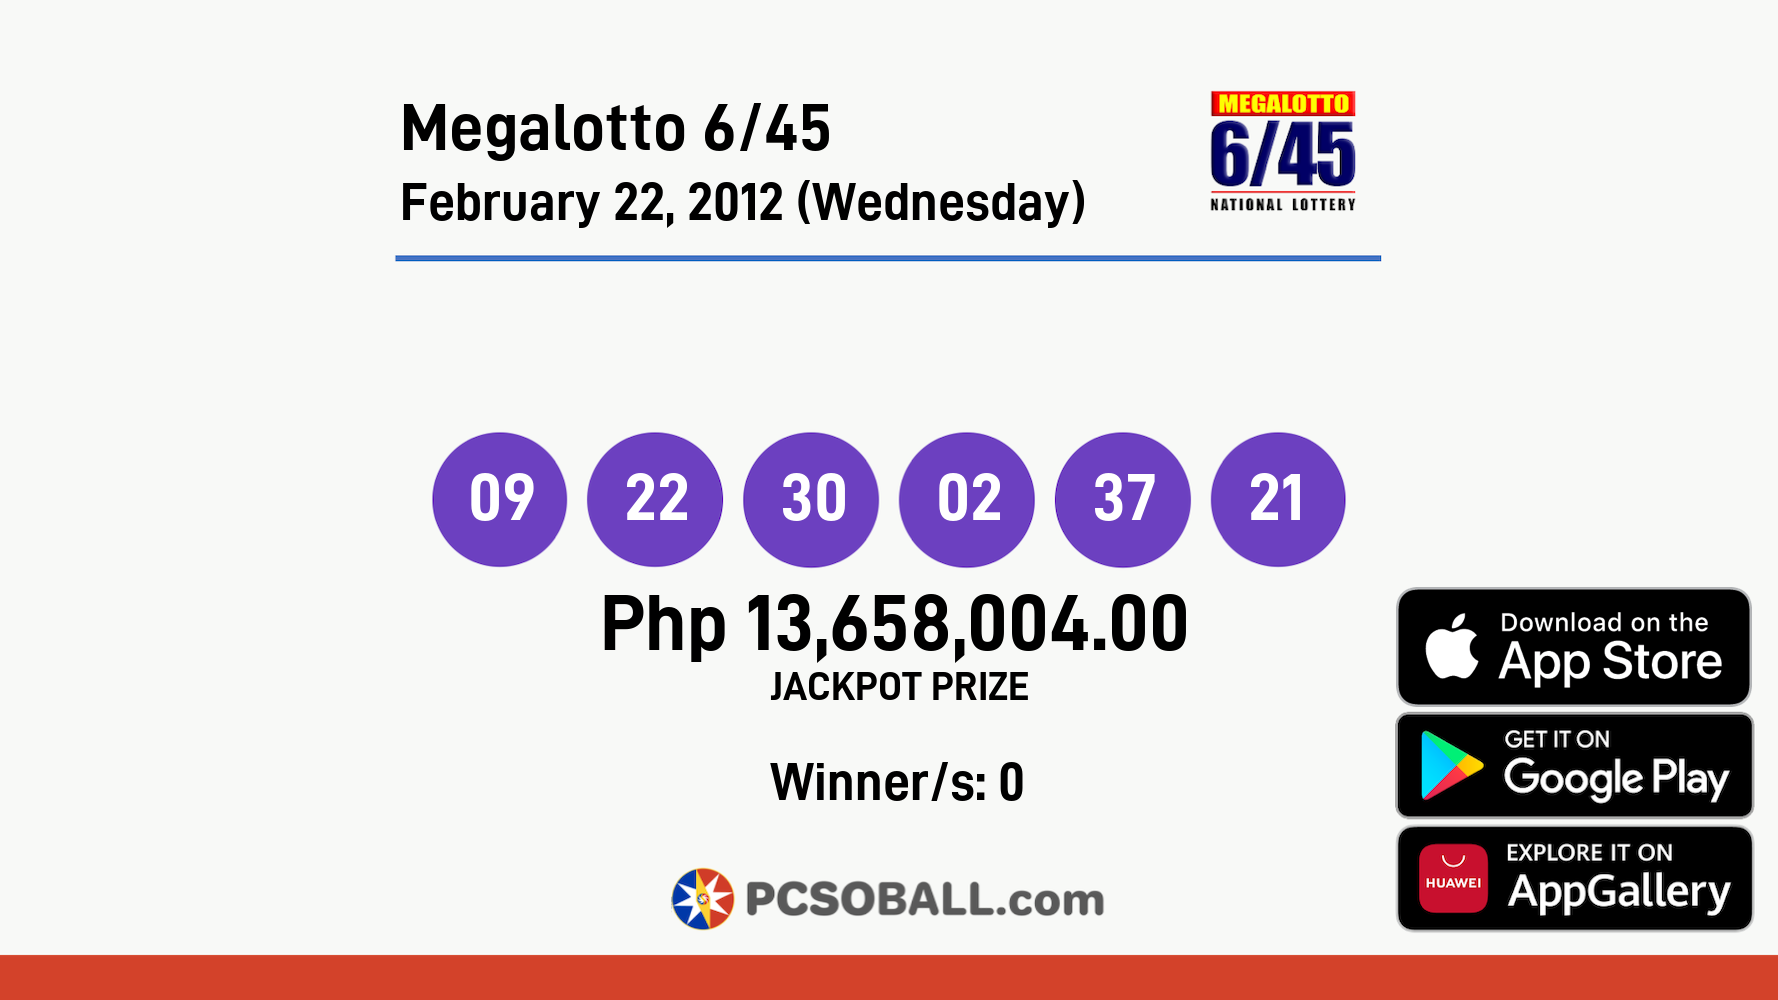 Megalotto 6/45 February 22, 2012 (Wednesday) Result